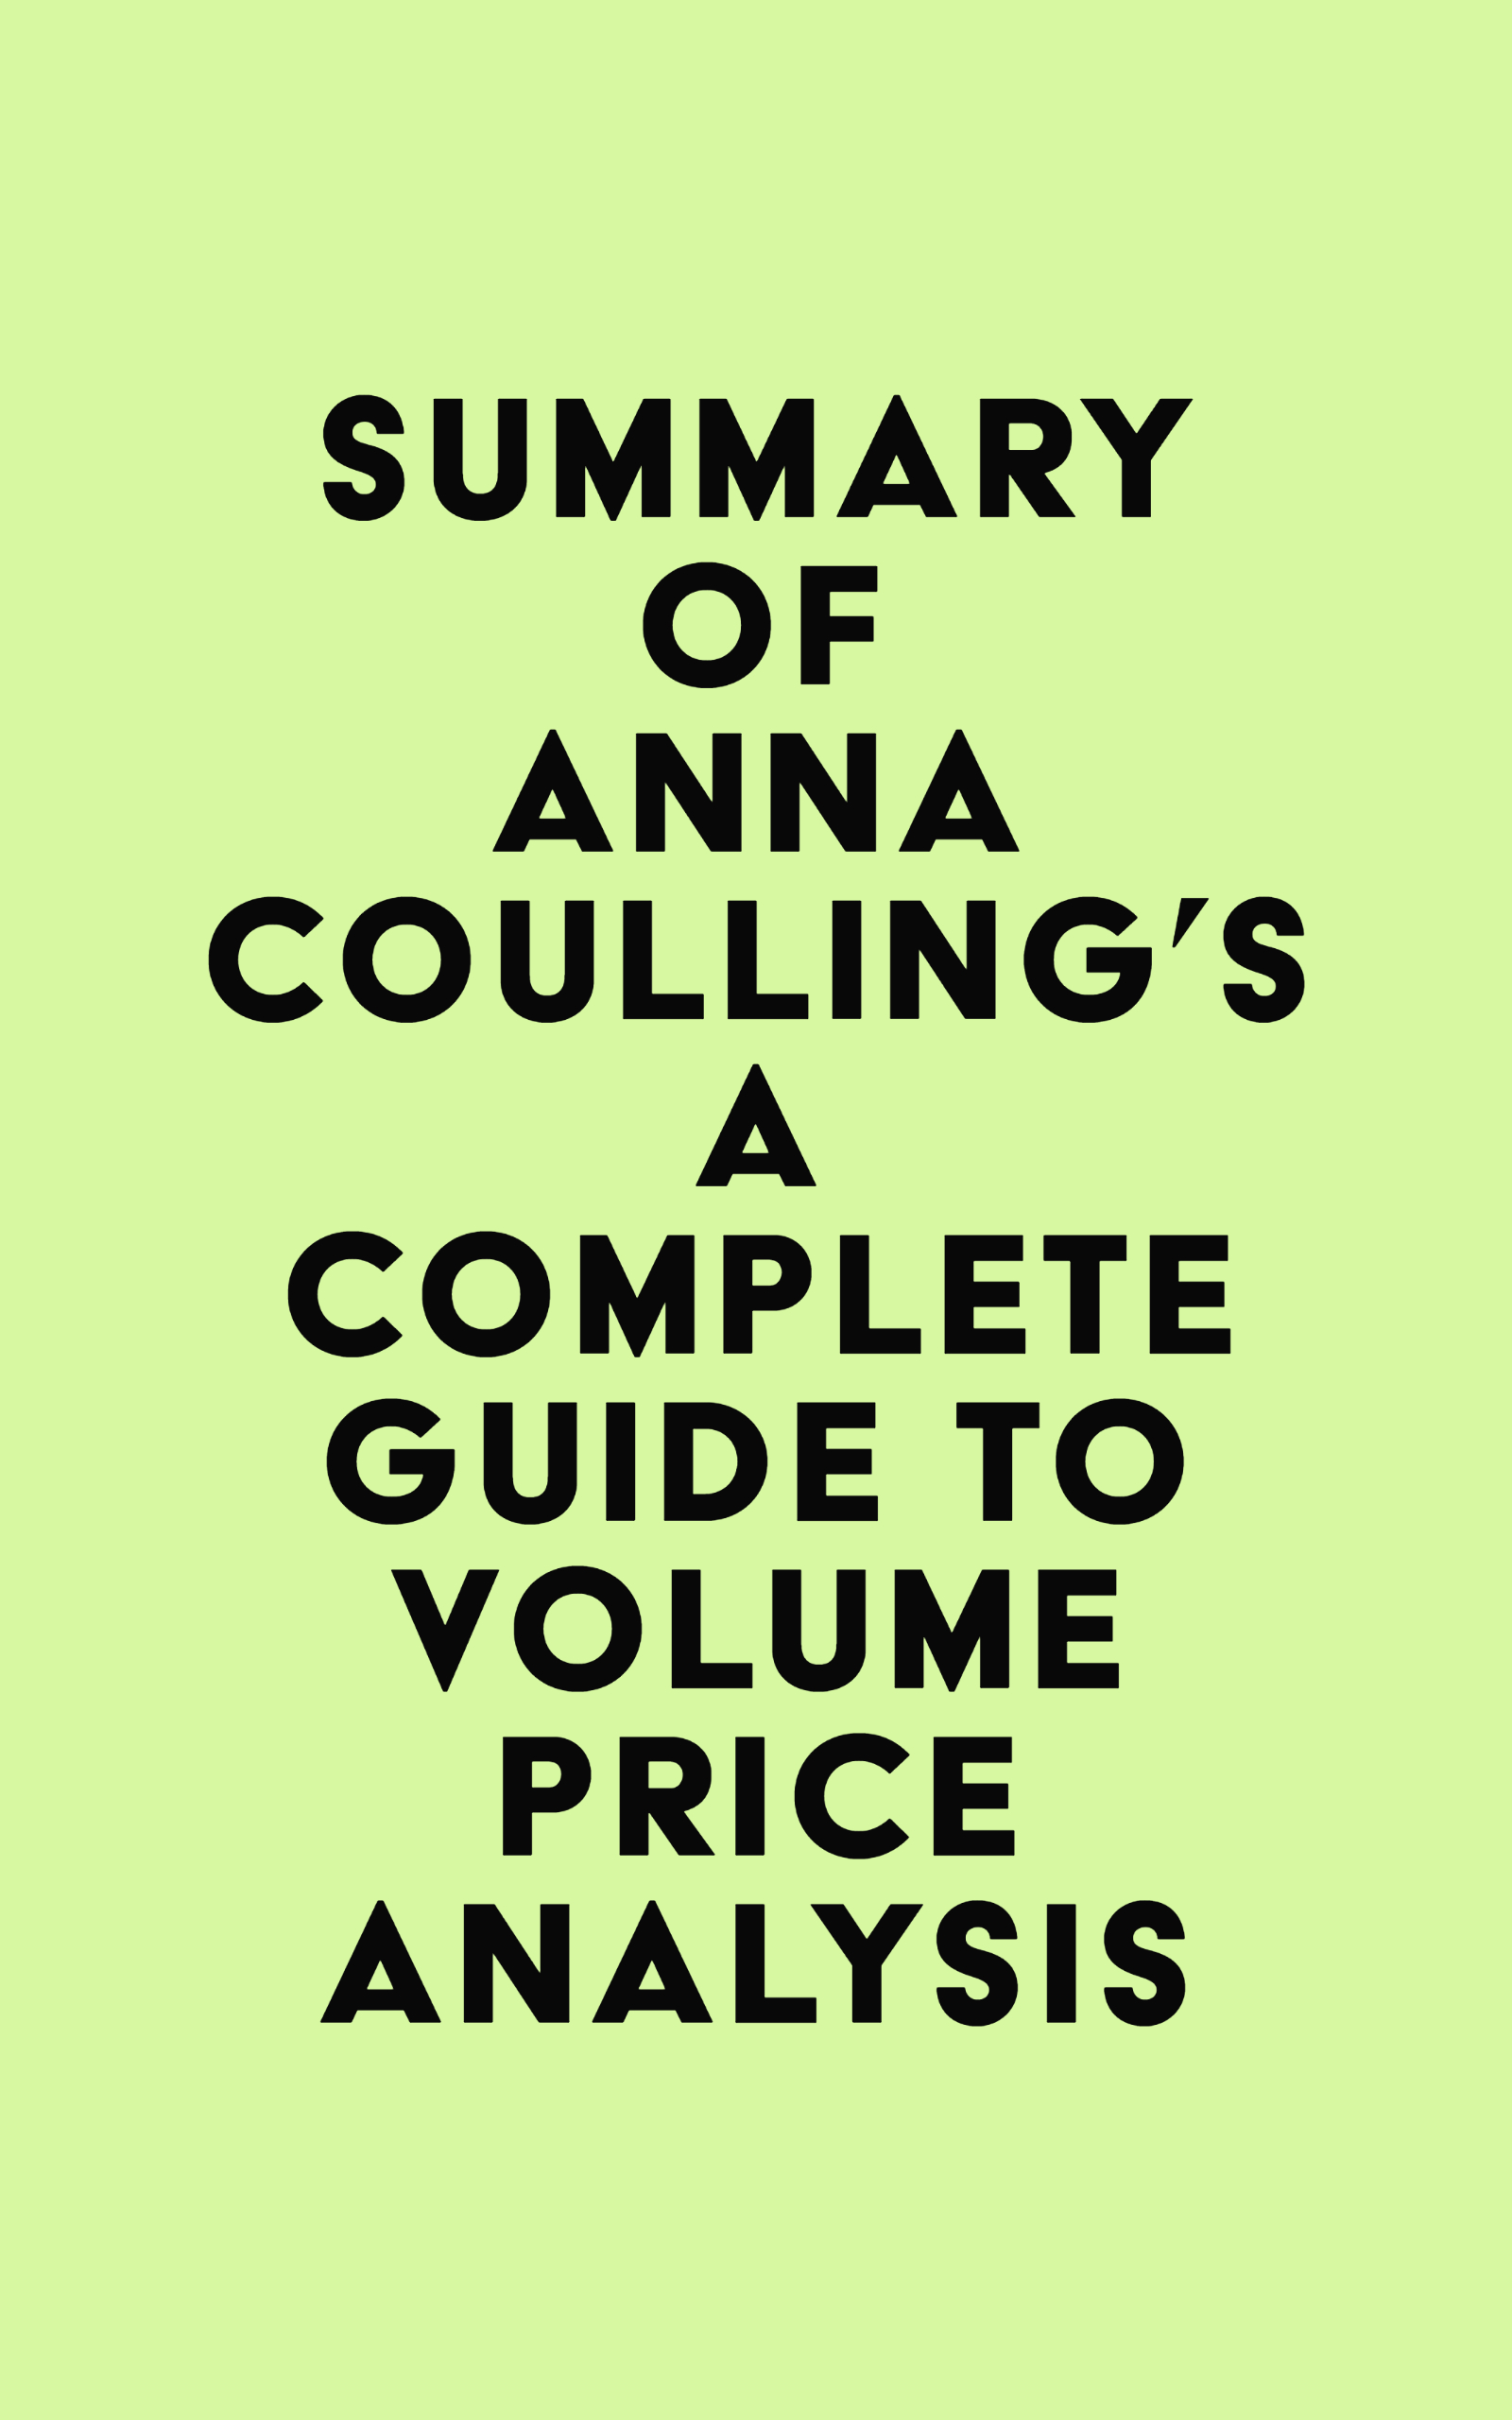 Summary of Anna Coulling's A Complete Guide To Volume Price Analysis